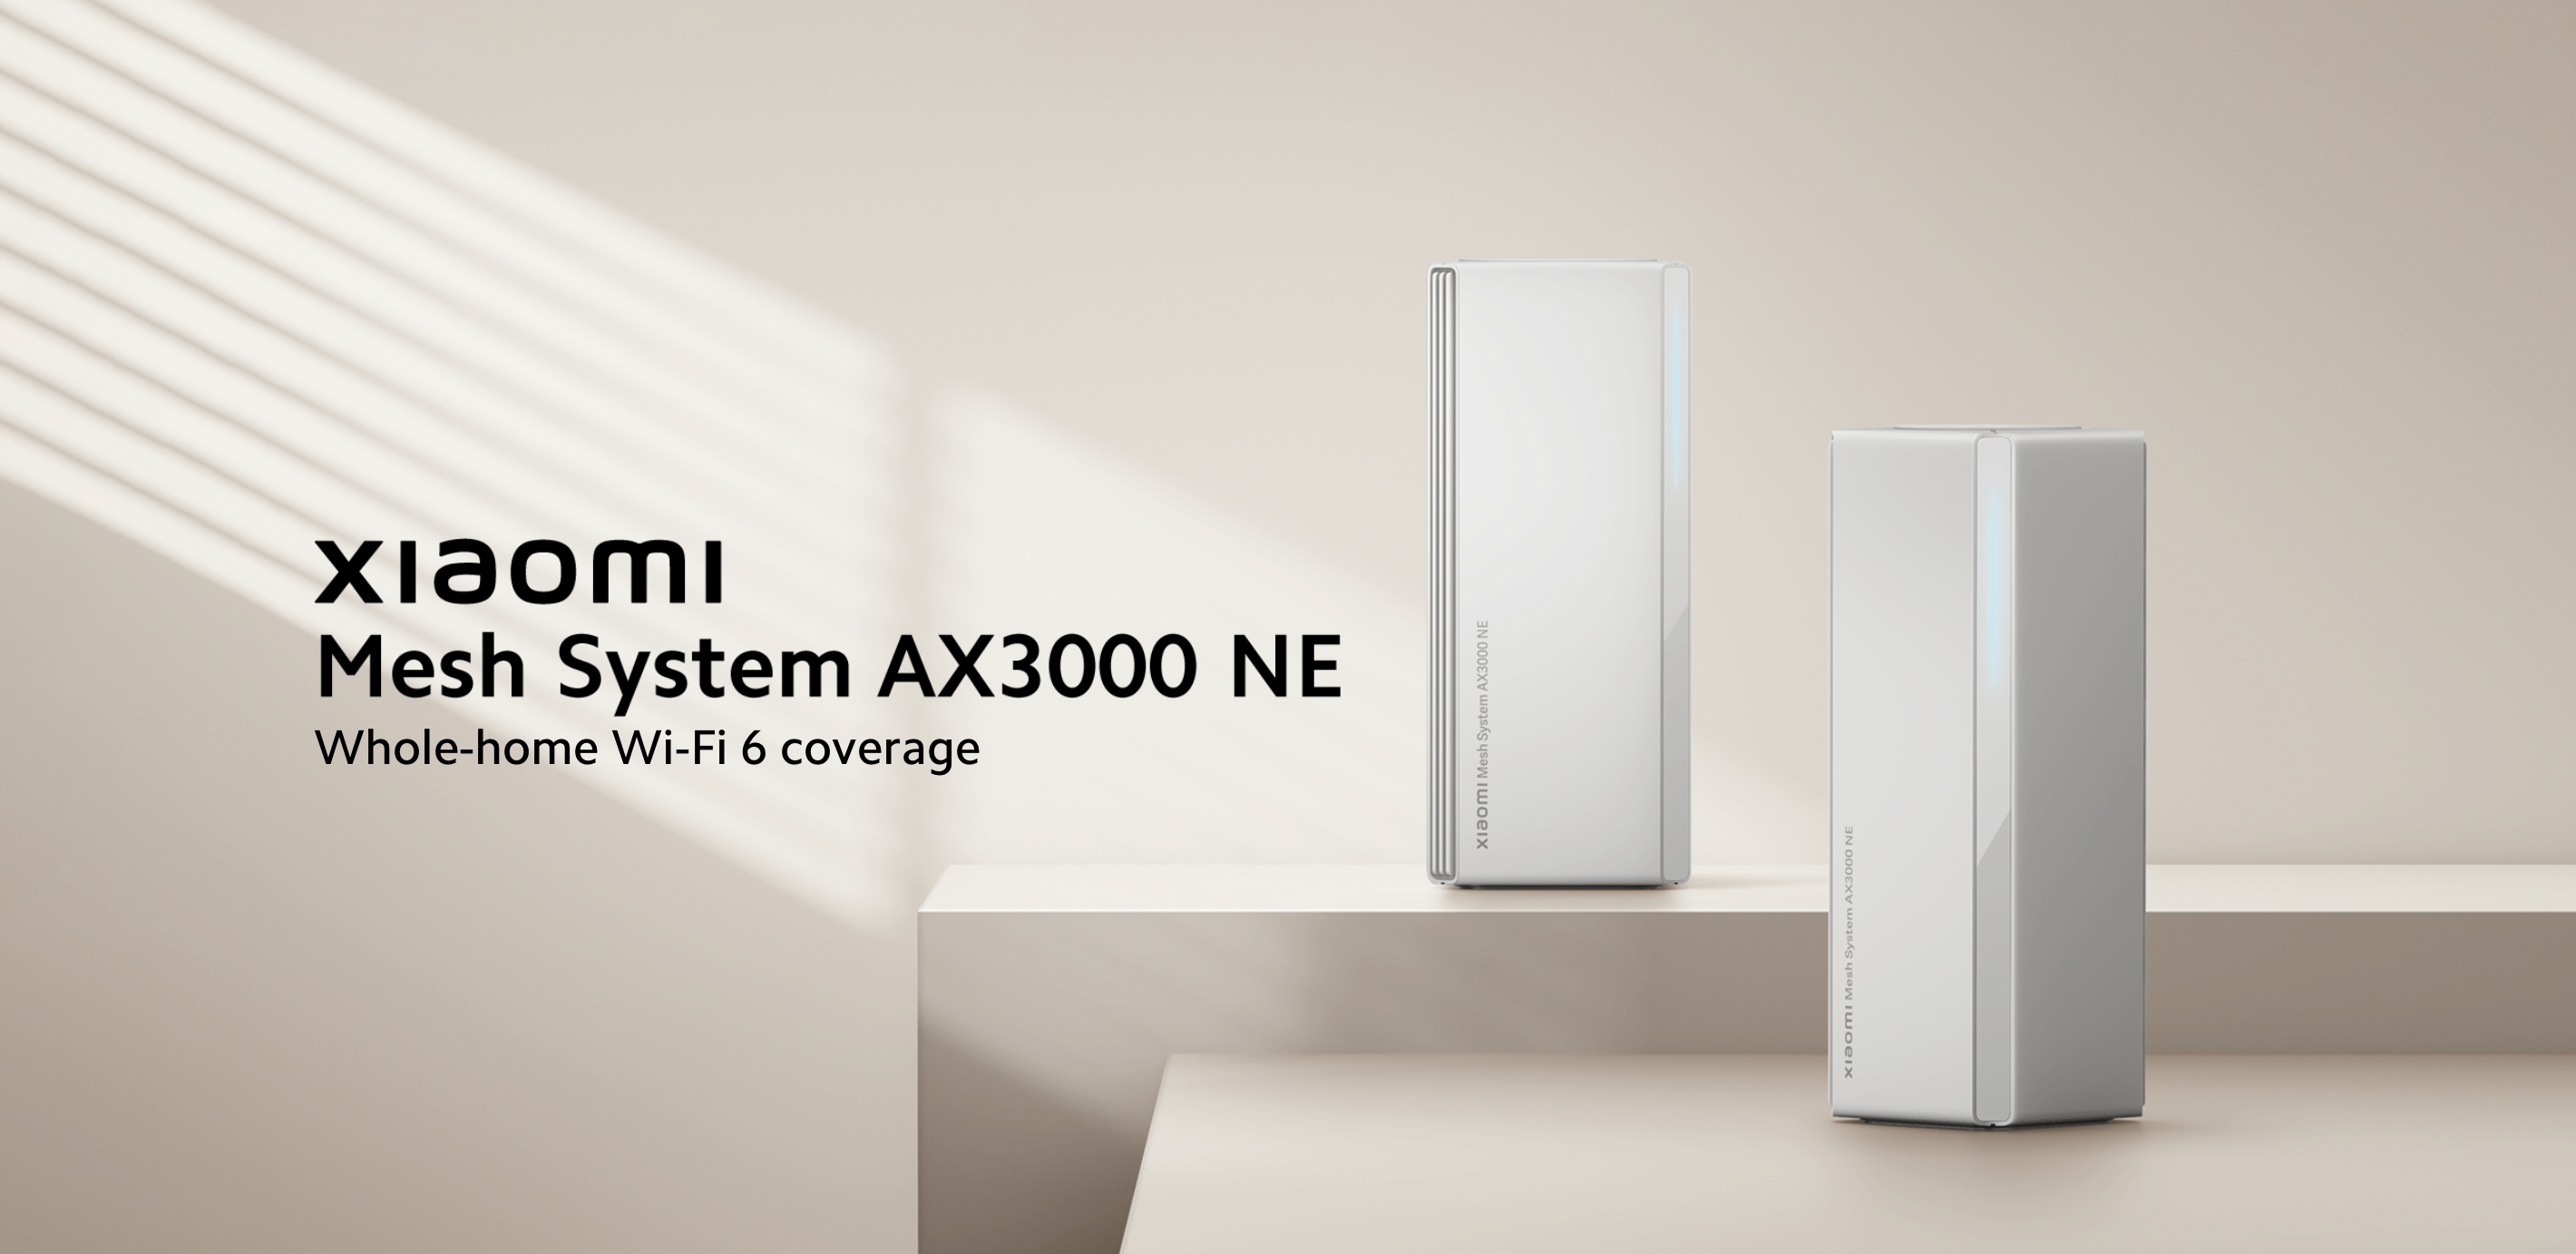 Xiaomi has introduced the AX3000 NE Mesh system with WiFi 6 support to the global market 